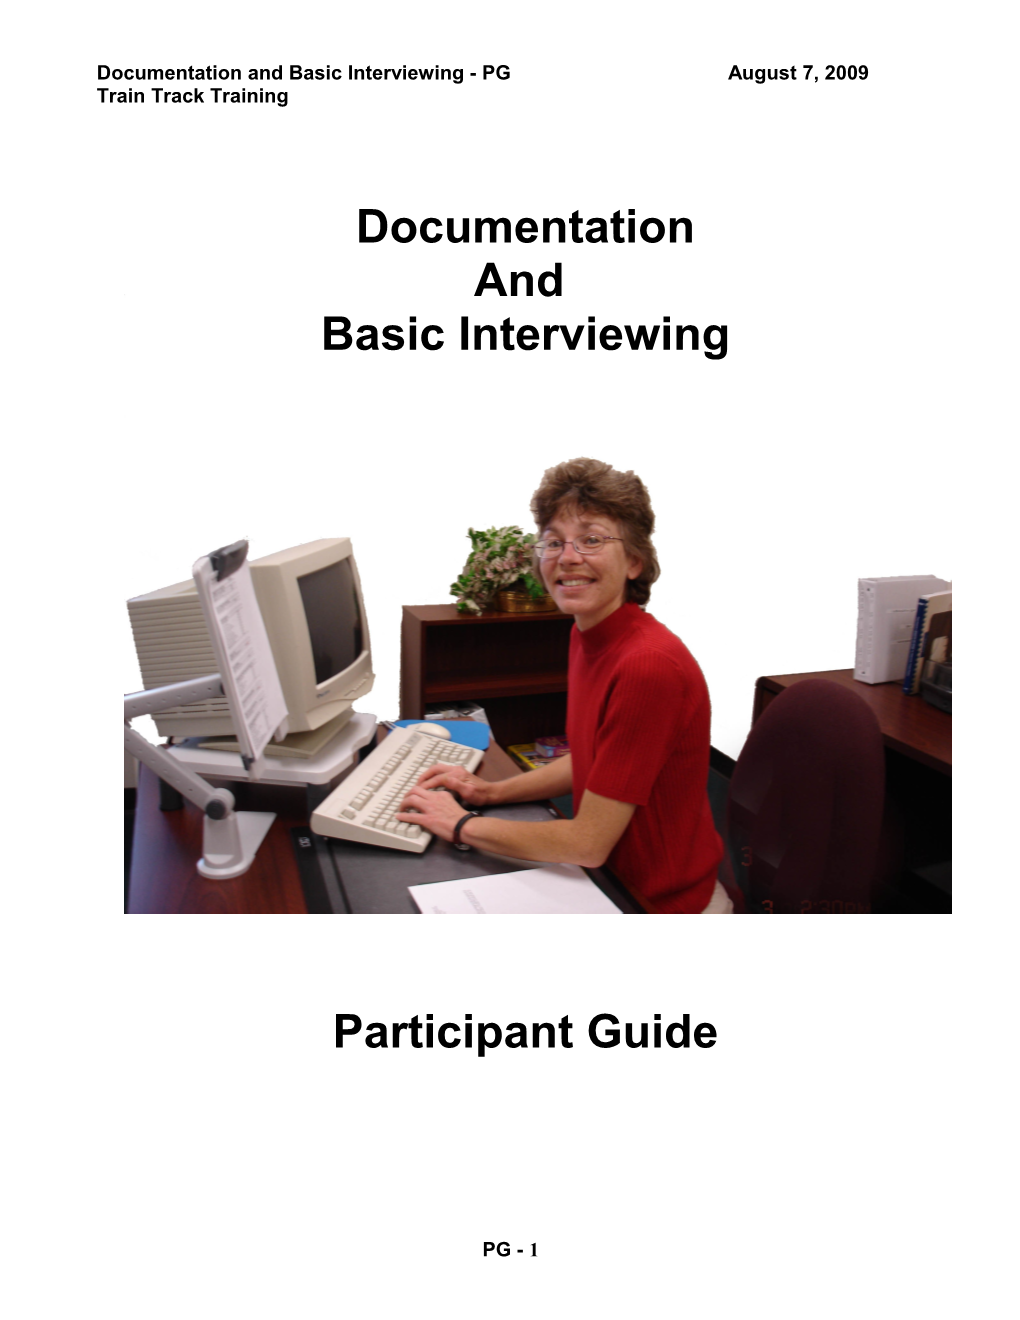 Documentation and Basic Interviewing - PG August 7, 2009